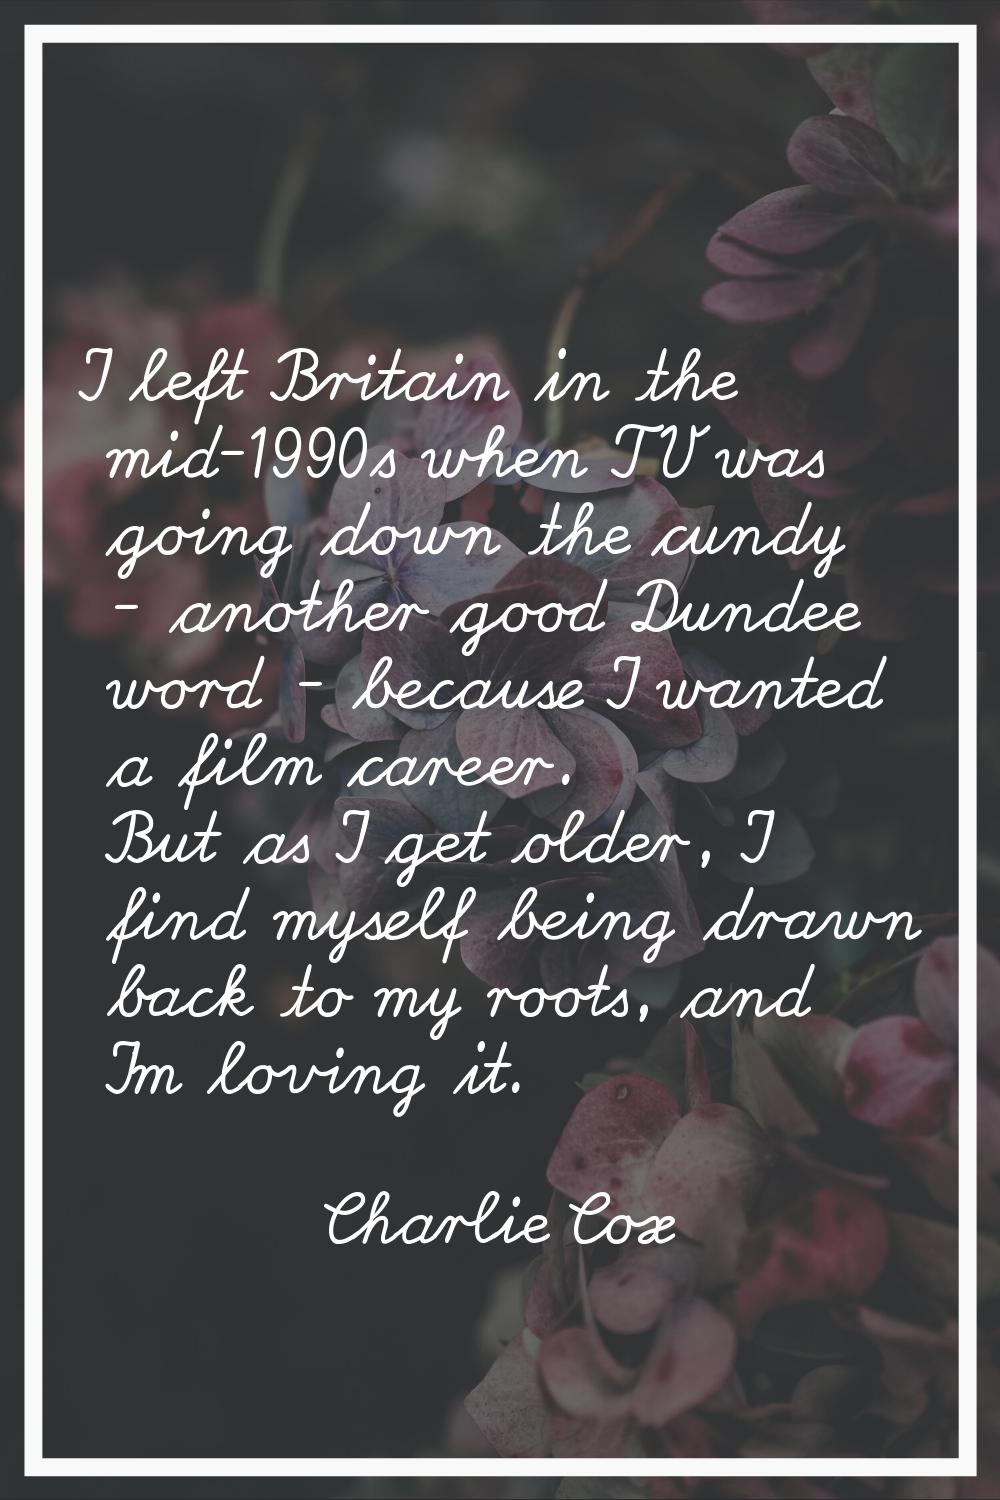 I left Britain in the mid-1990s when TV was going down the cundy - another good Dundee word - becau